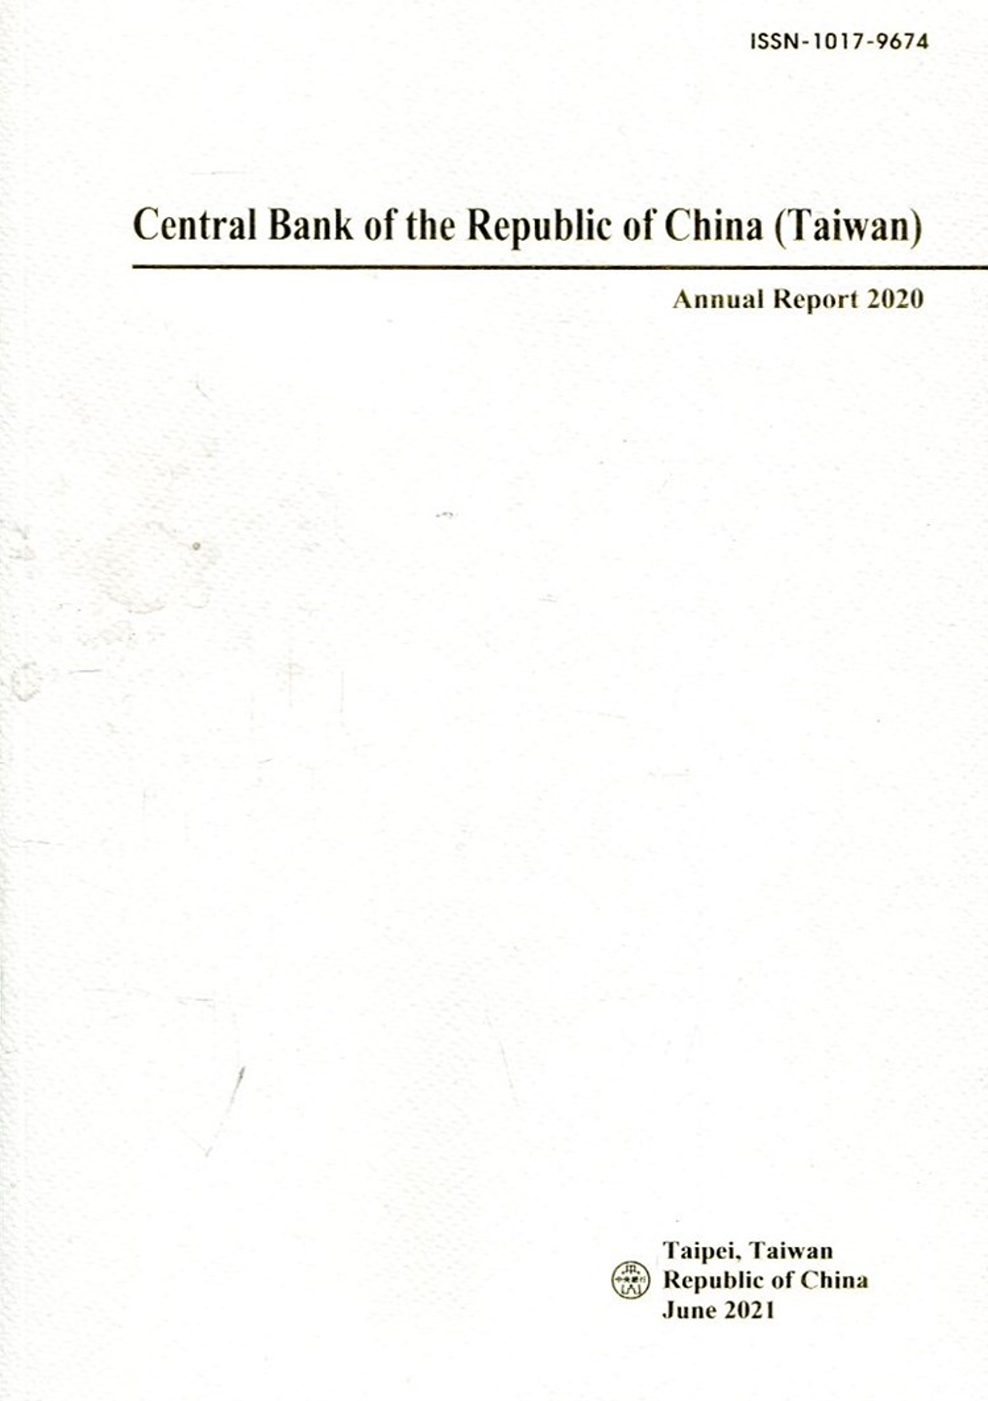 Annual Report,The Central Bank of China 2020